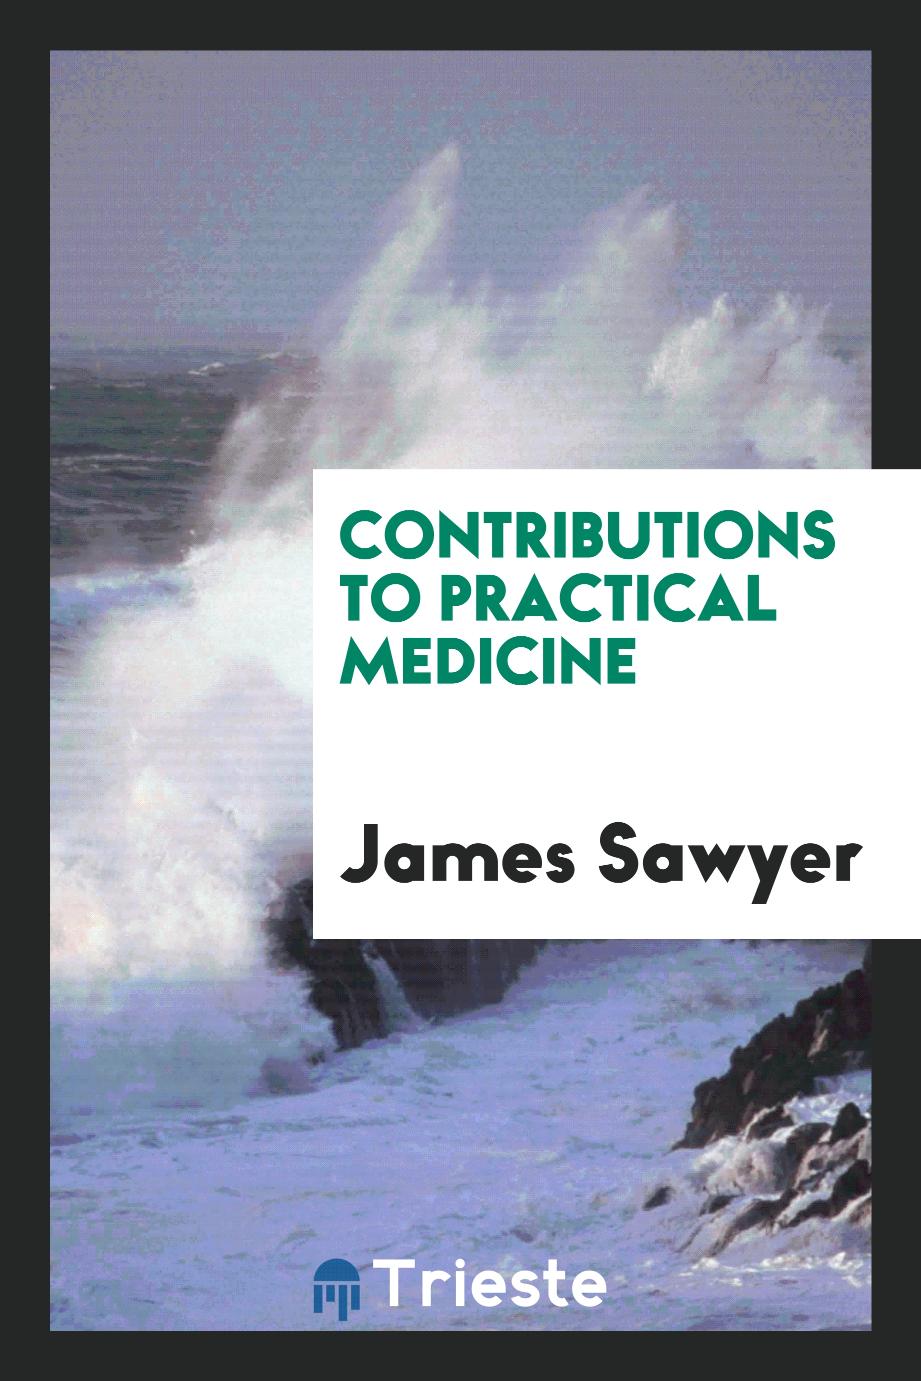 Contributions to practical medicine